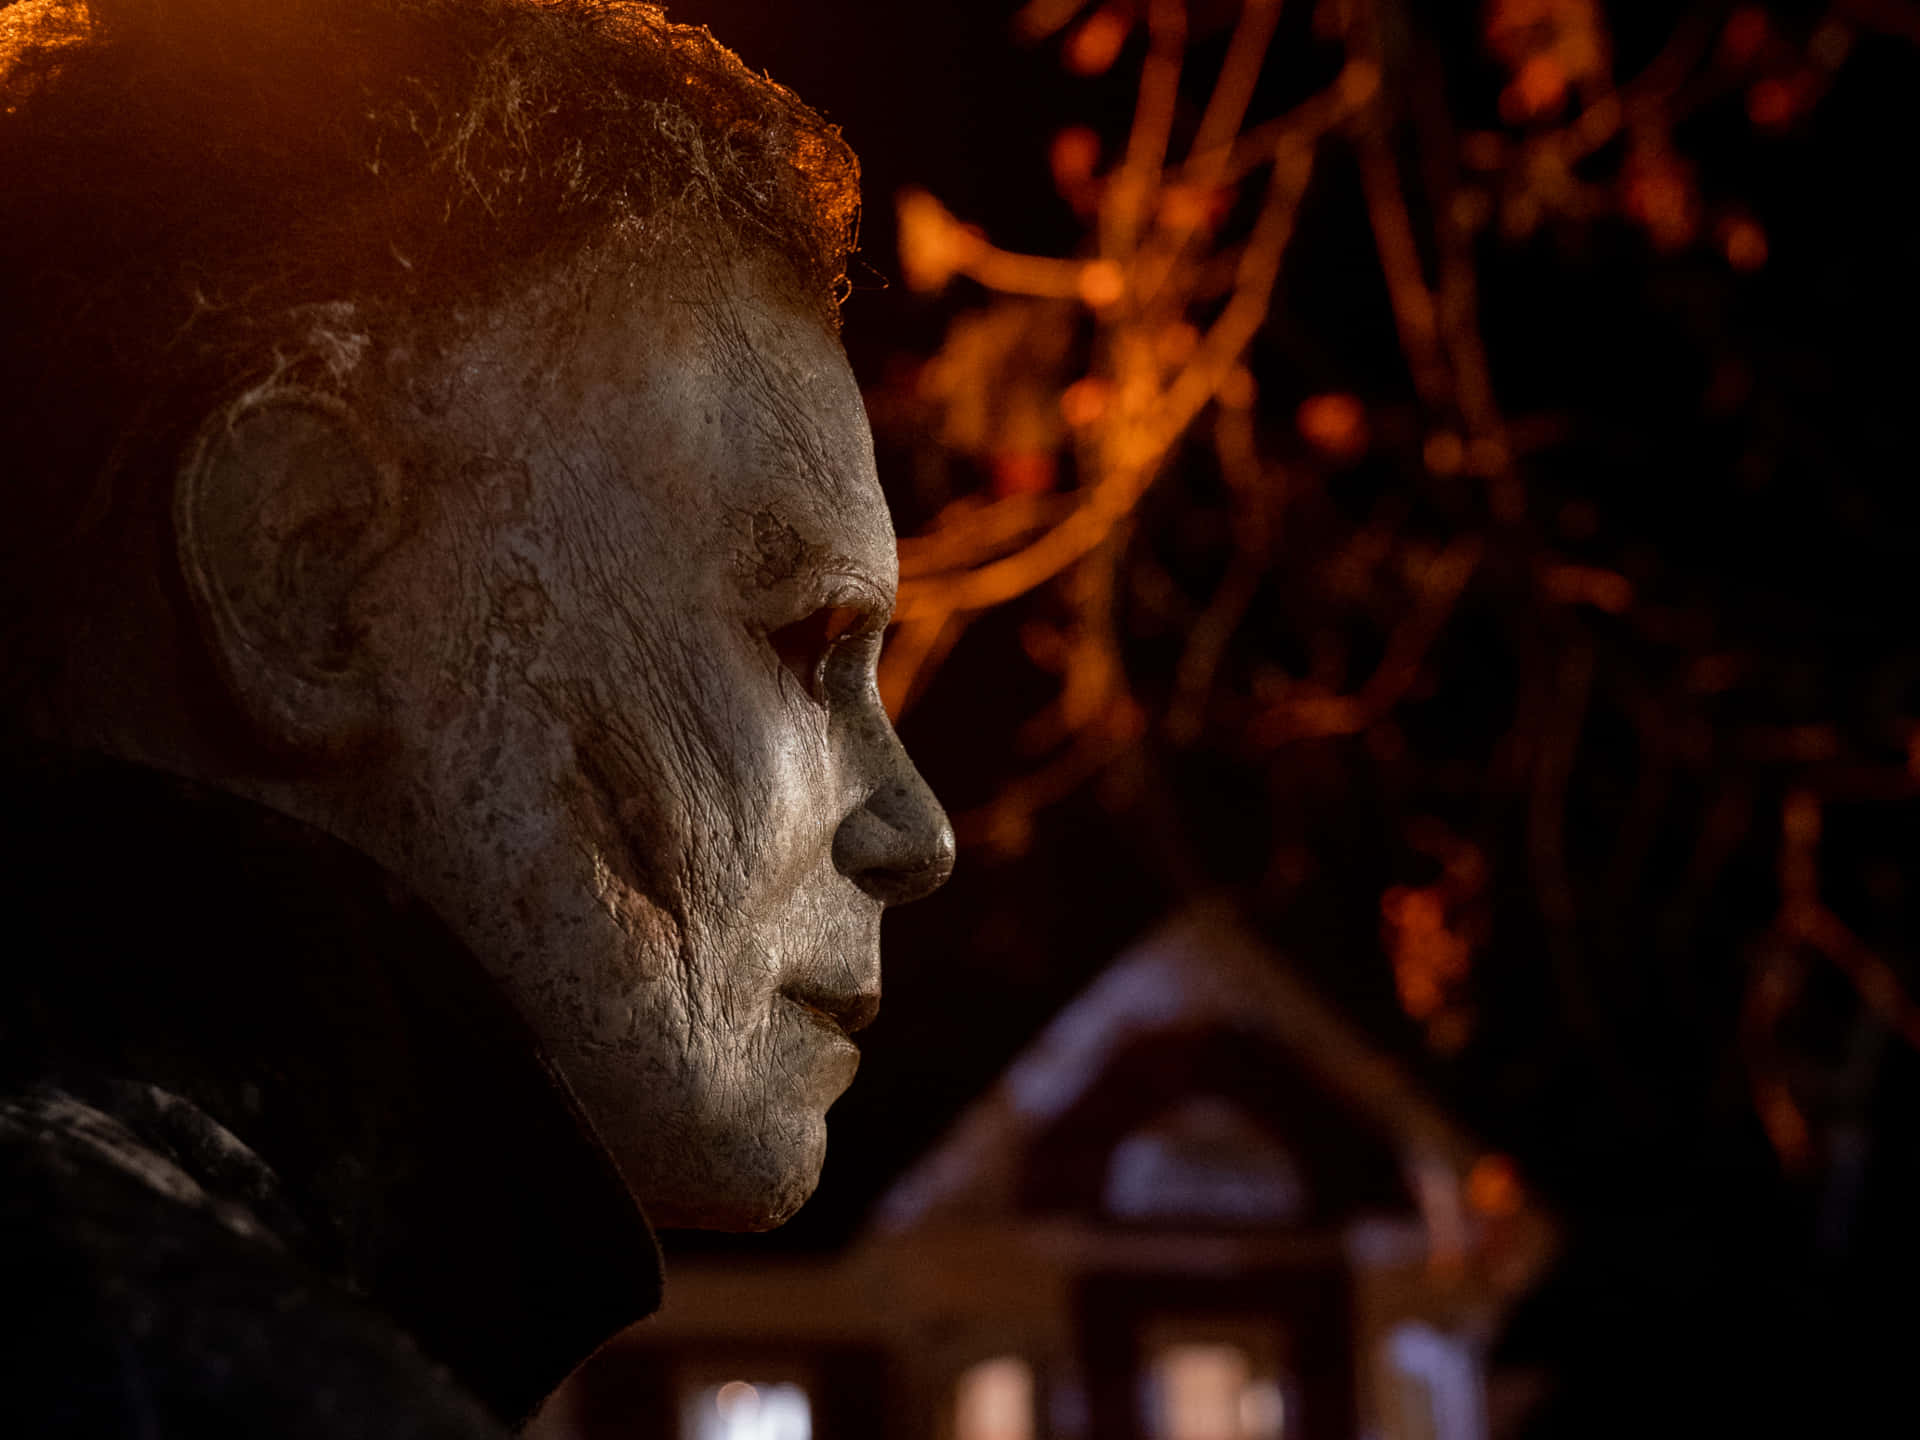 The terrifying image of horror movie icon Michael Myers